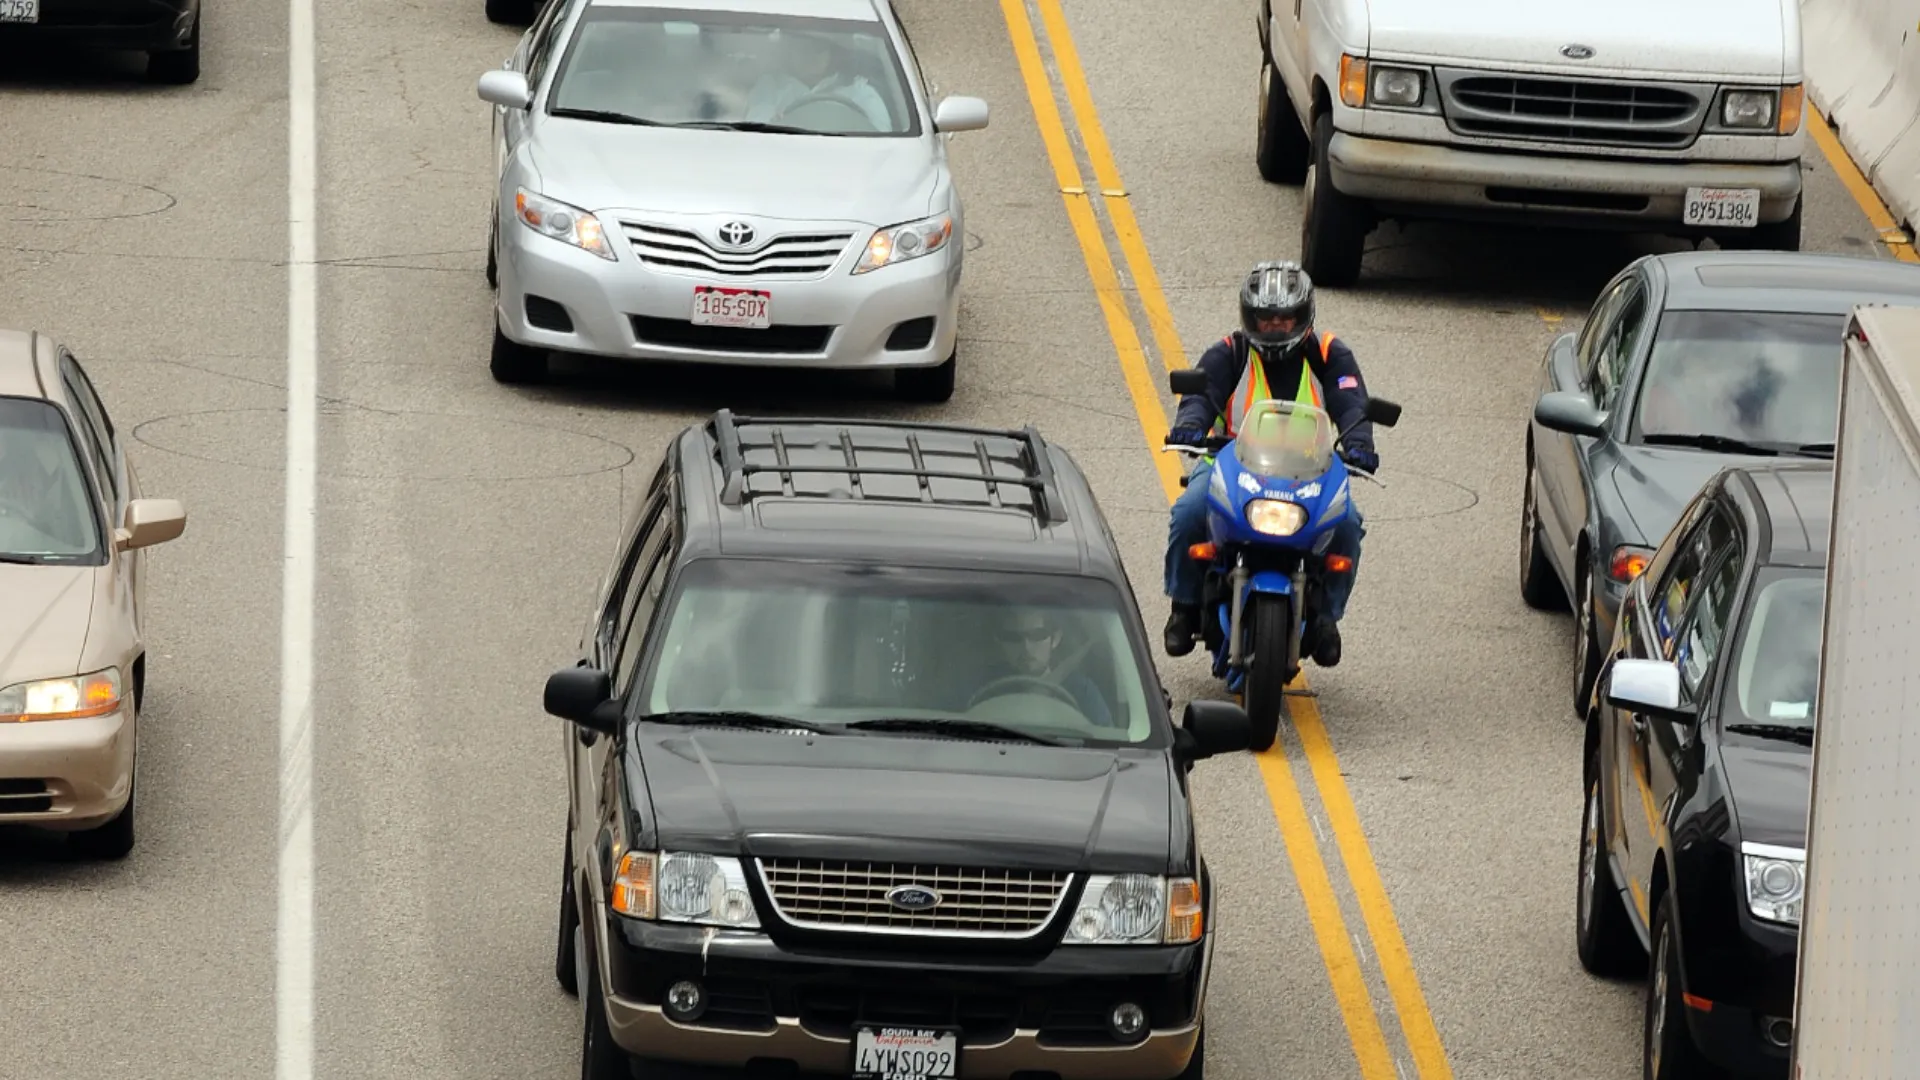 Minnesota Makes Moves: New Motorcycle Rule Aims to Cut Traffic Jams and Boost Biker Safety